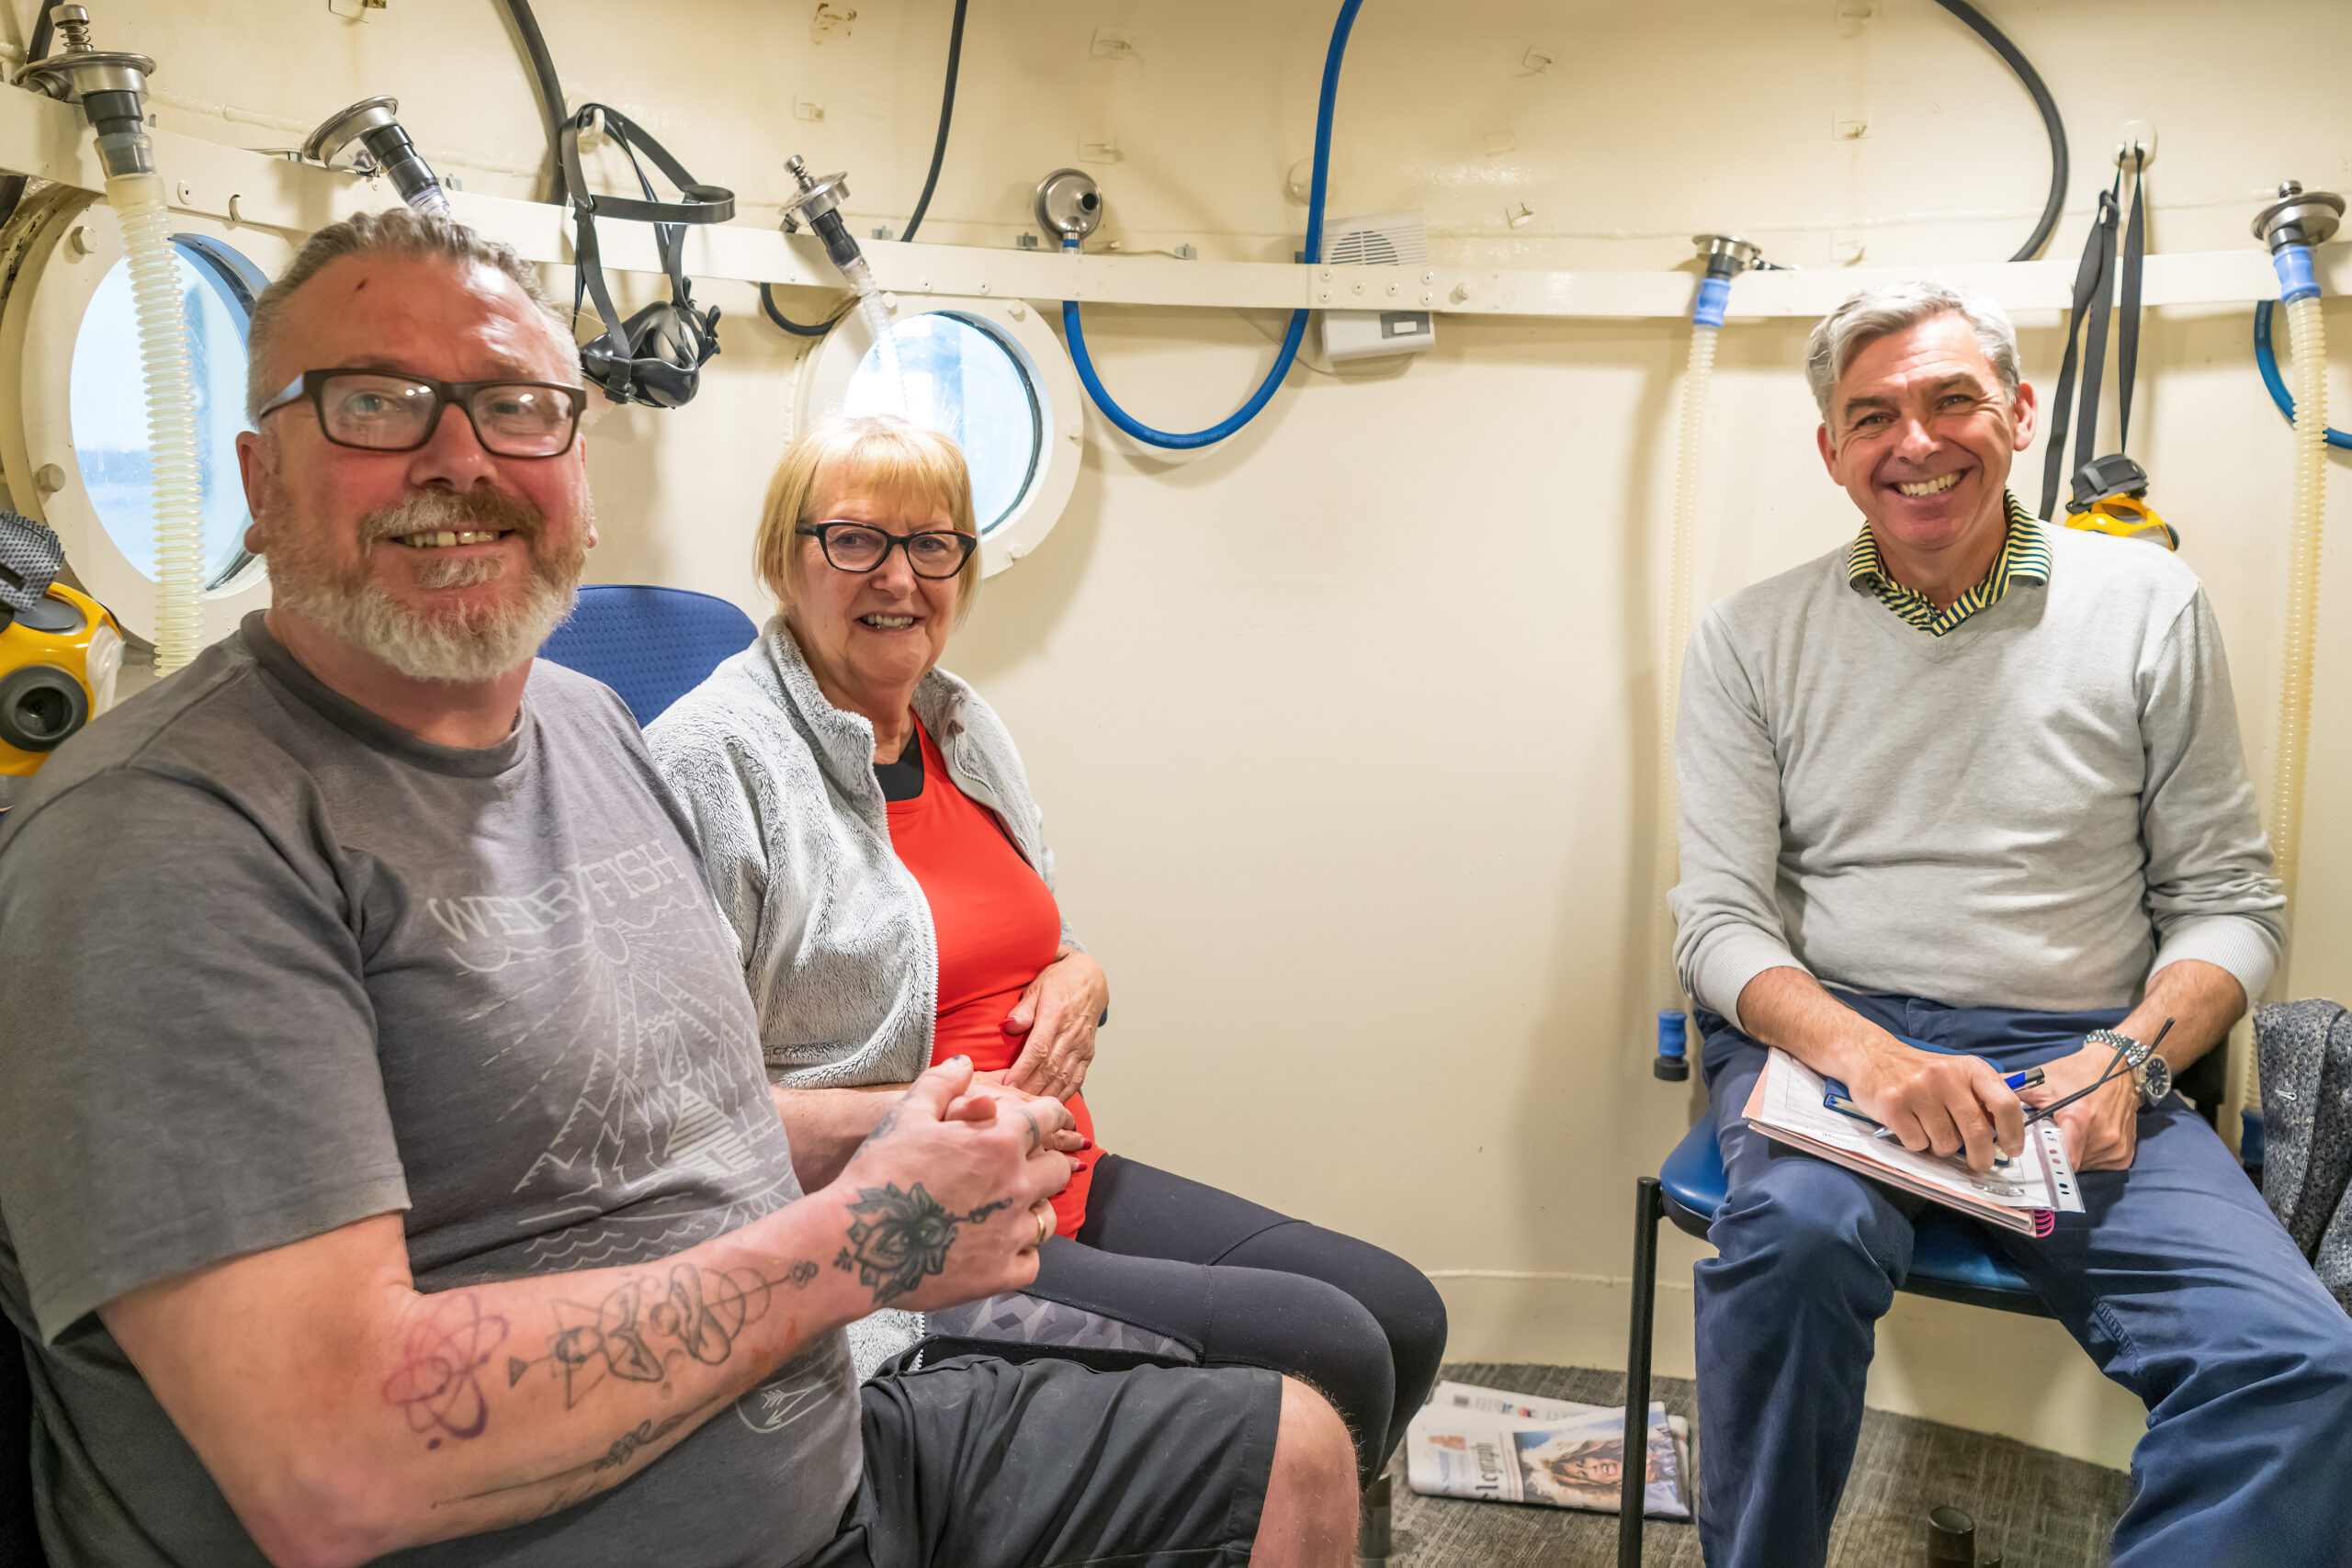 Three people are sitting in the oxygen chamber. They are smiling and looking at the camera.